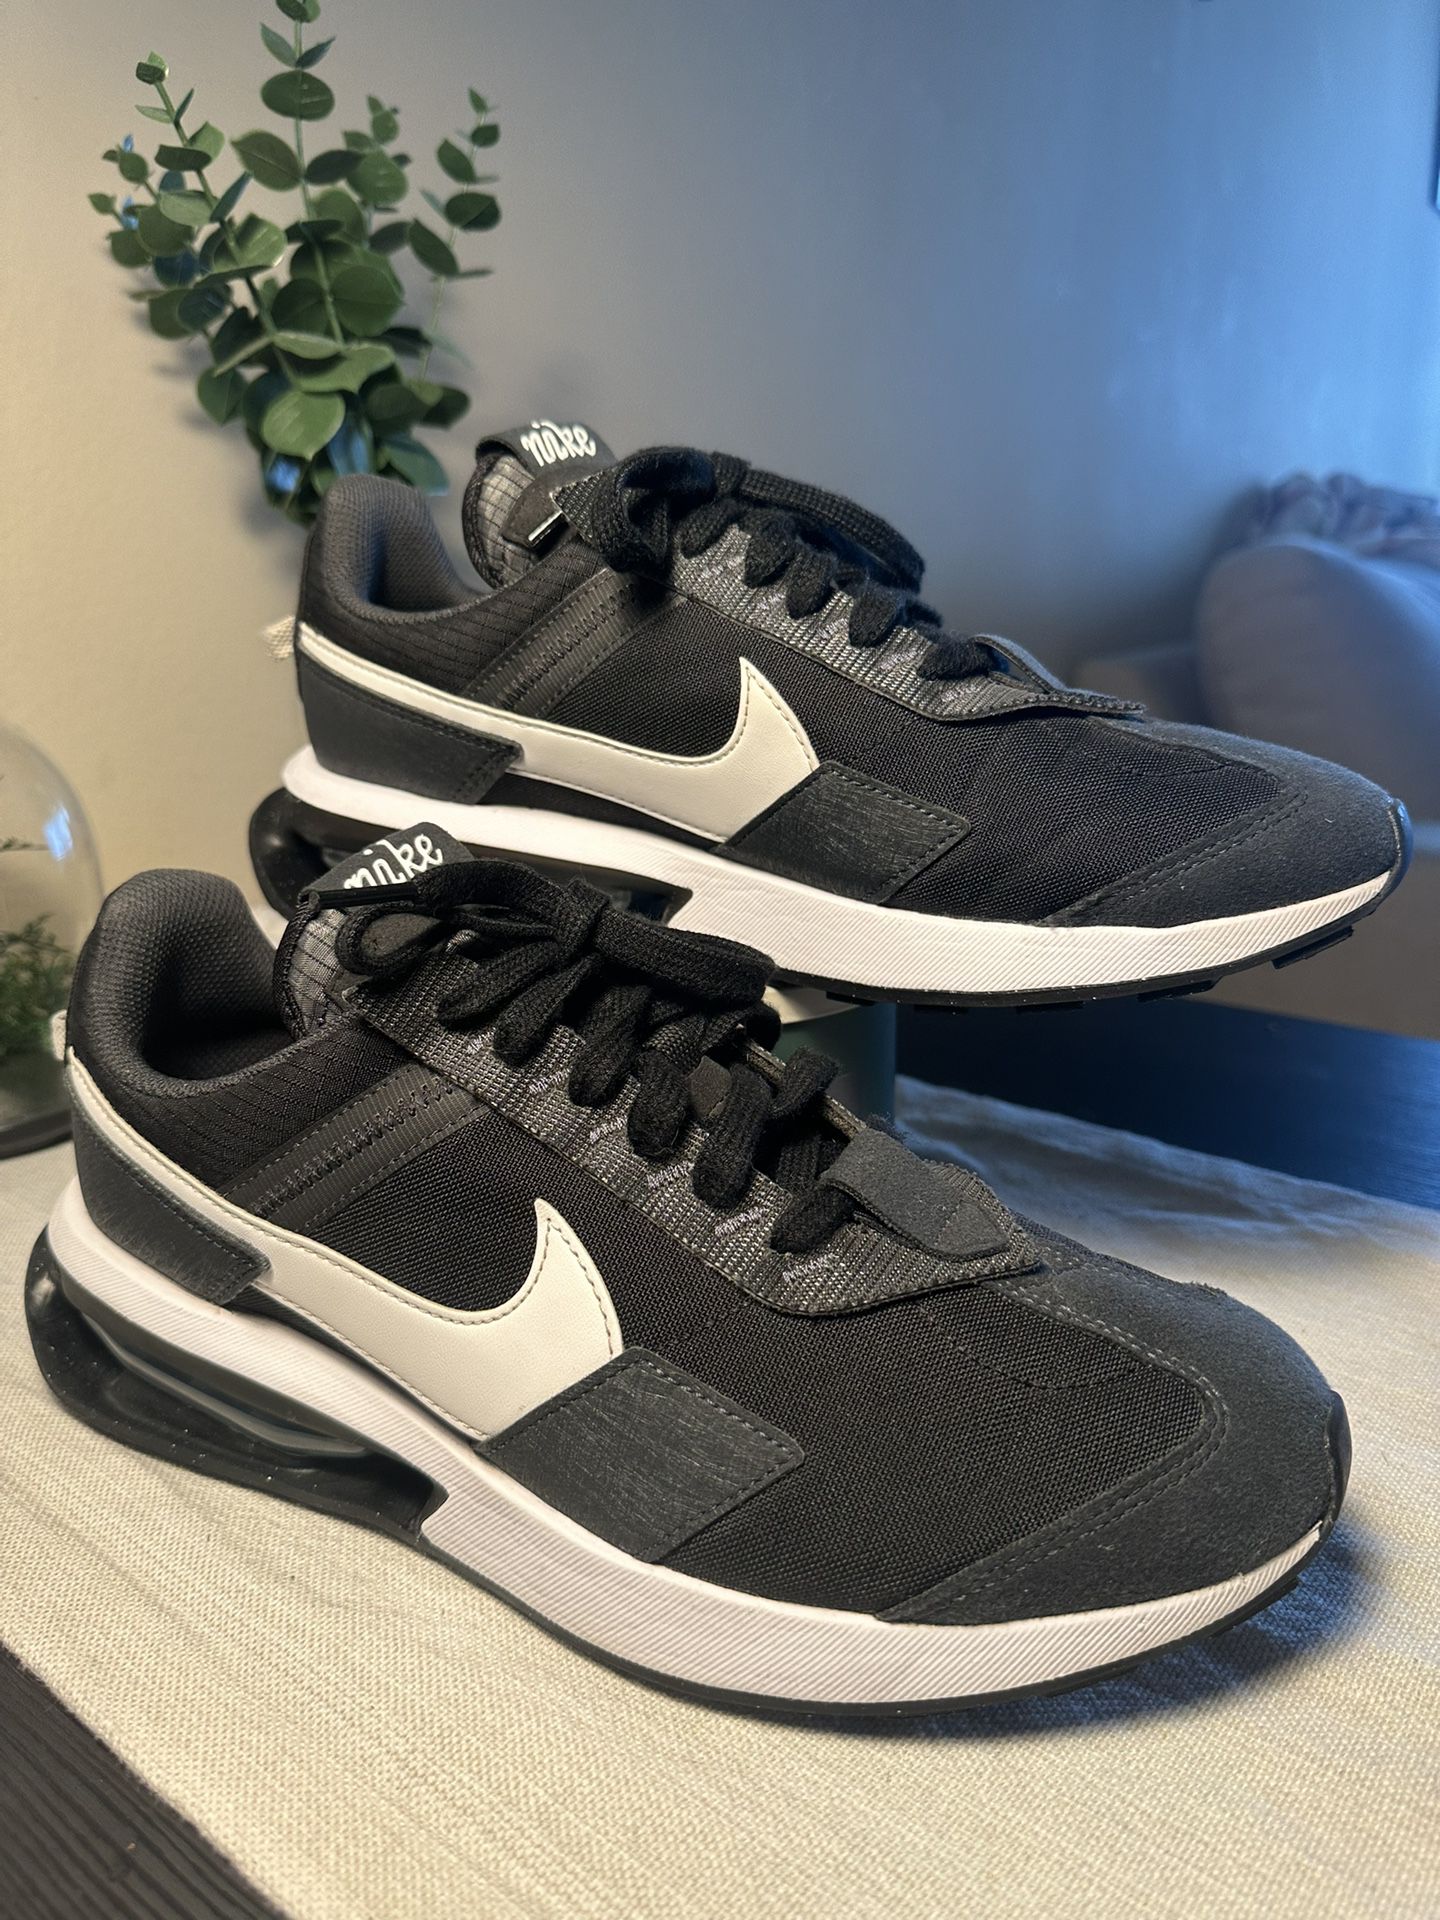 Black Nike Air Max Pre-Day Shoes for Sale Newport Beach, - OfferUp